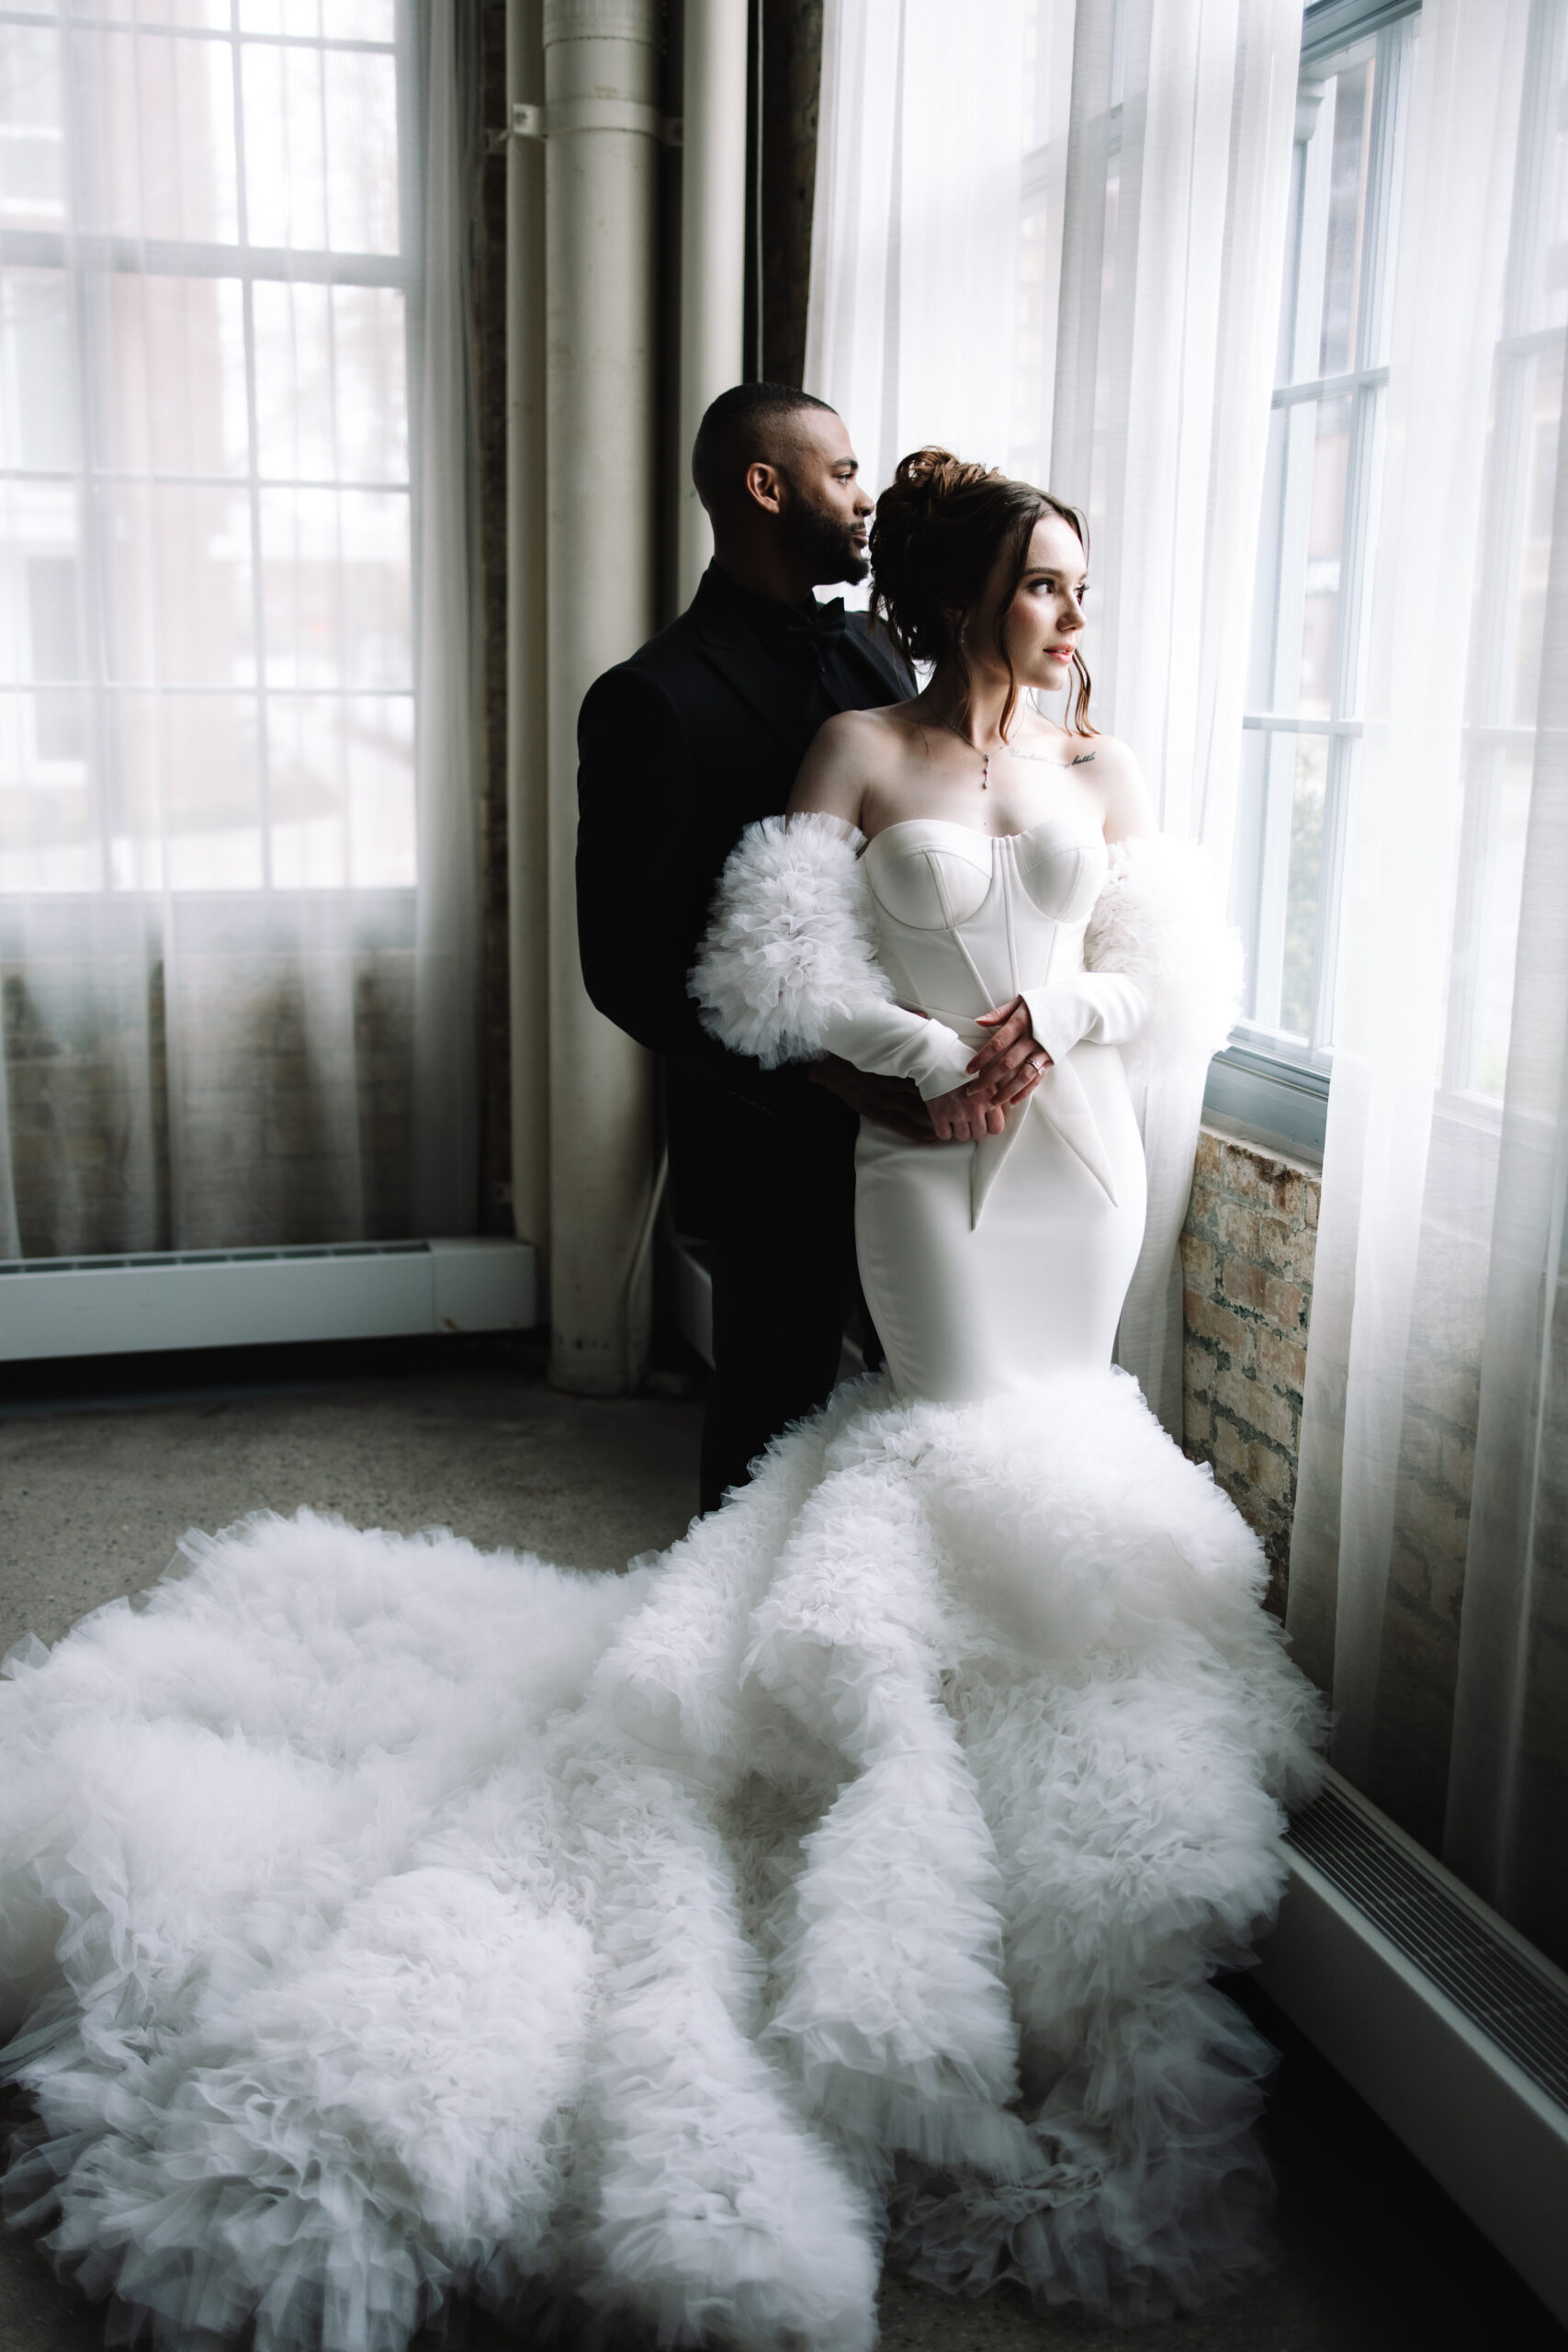 A Groom in a black suit holding his bride from behind as they stare out the large window. The bride is wearing a voluptuous mermaid wedding dress.